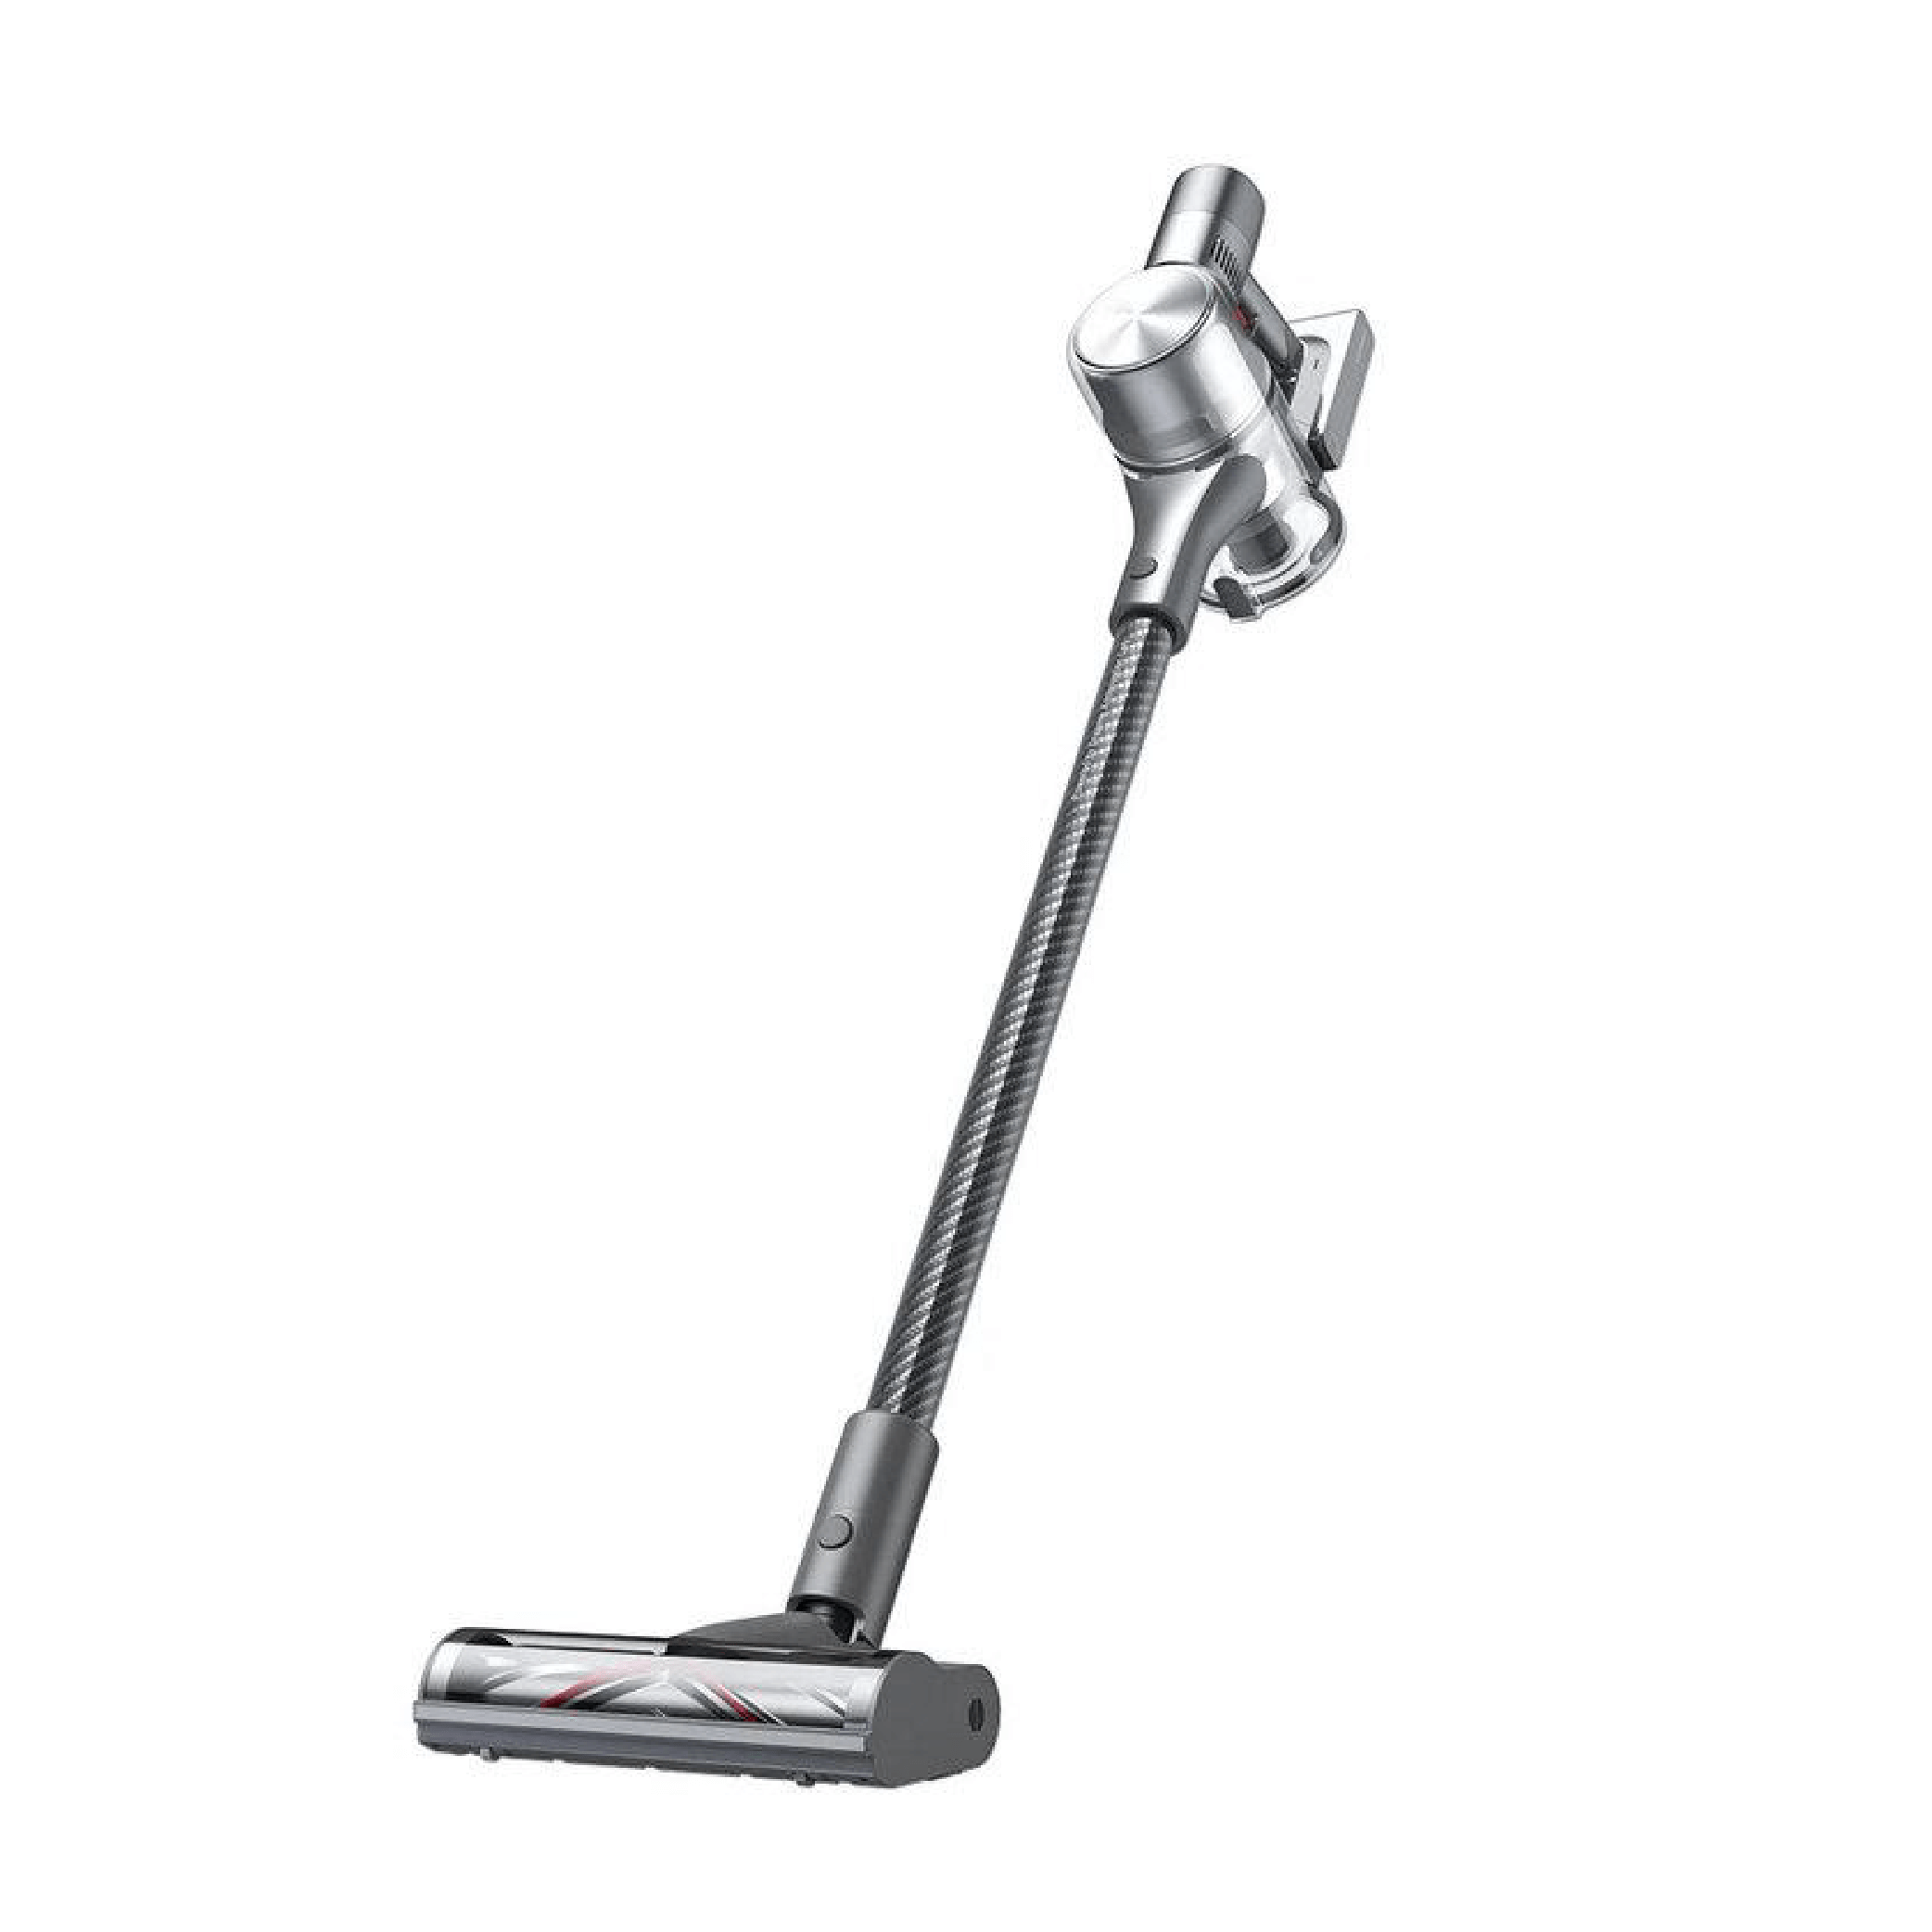 XIAOMI DREAME T30 HAND HOOVER